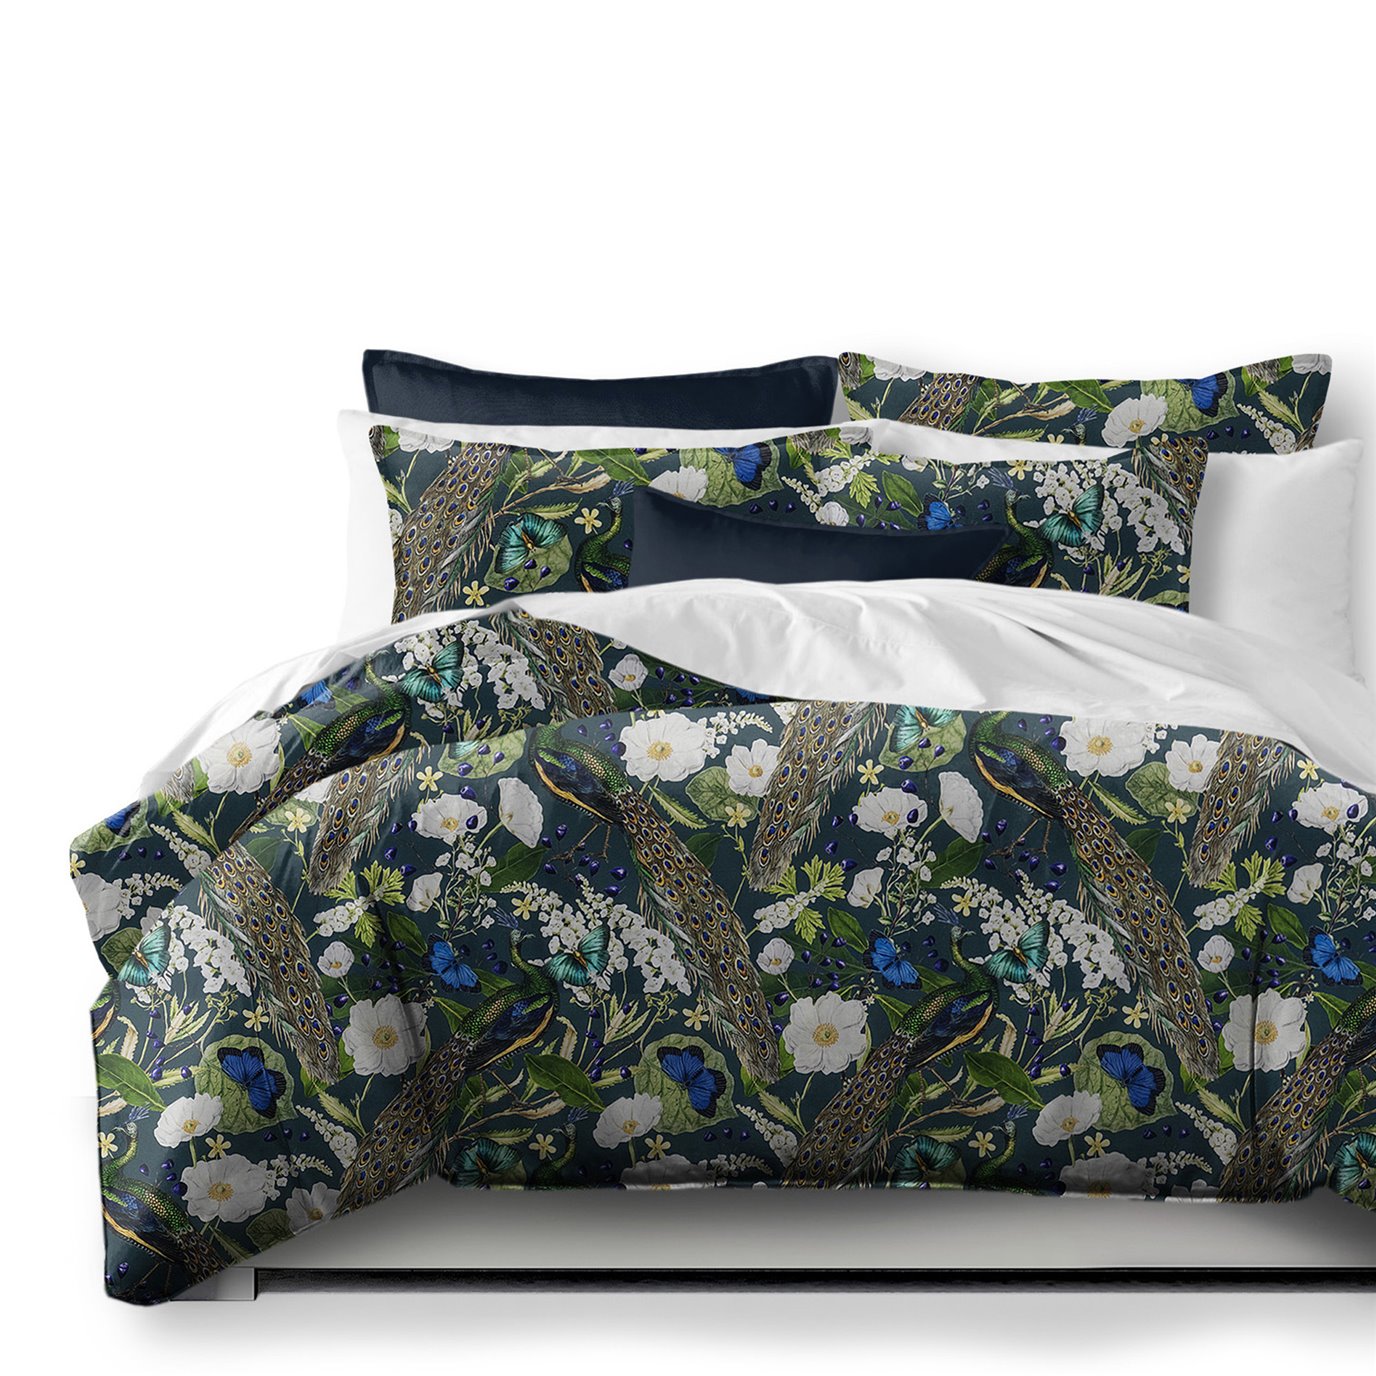 Peacock Print Teal/Navy Comforter and Pillow Sham(s) Set - Size Full